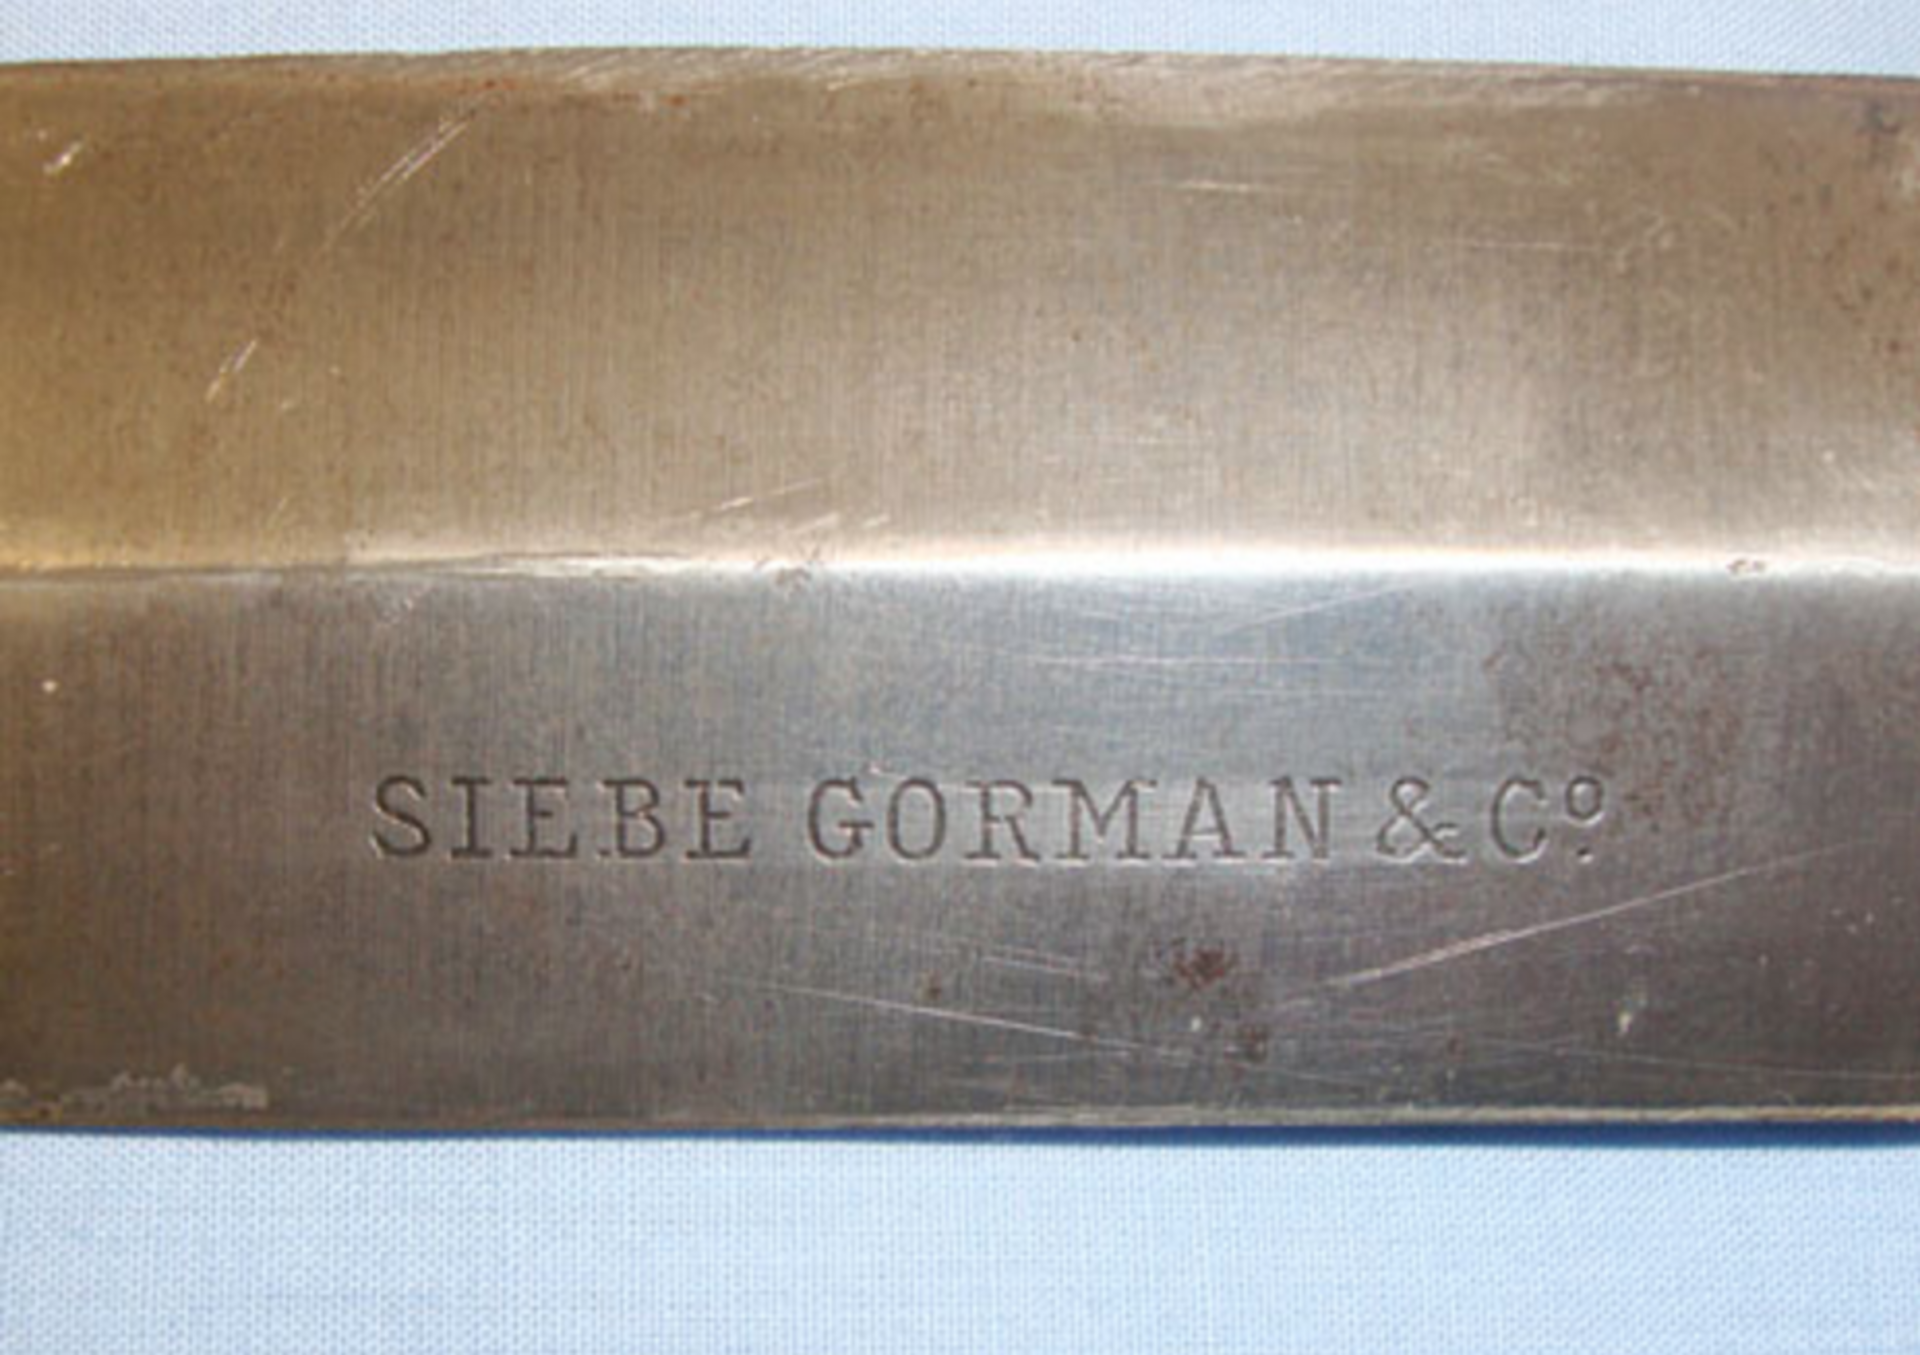 Mint, 1960's British Royal Navy Diver's Knife By Siebe Gorman & Co Ltd & Brass Scabbard - Image 2 of 3